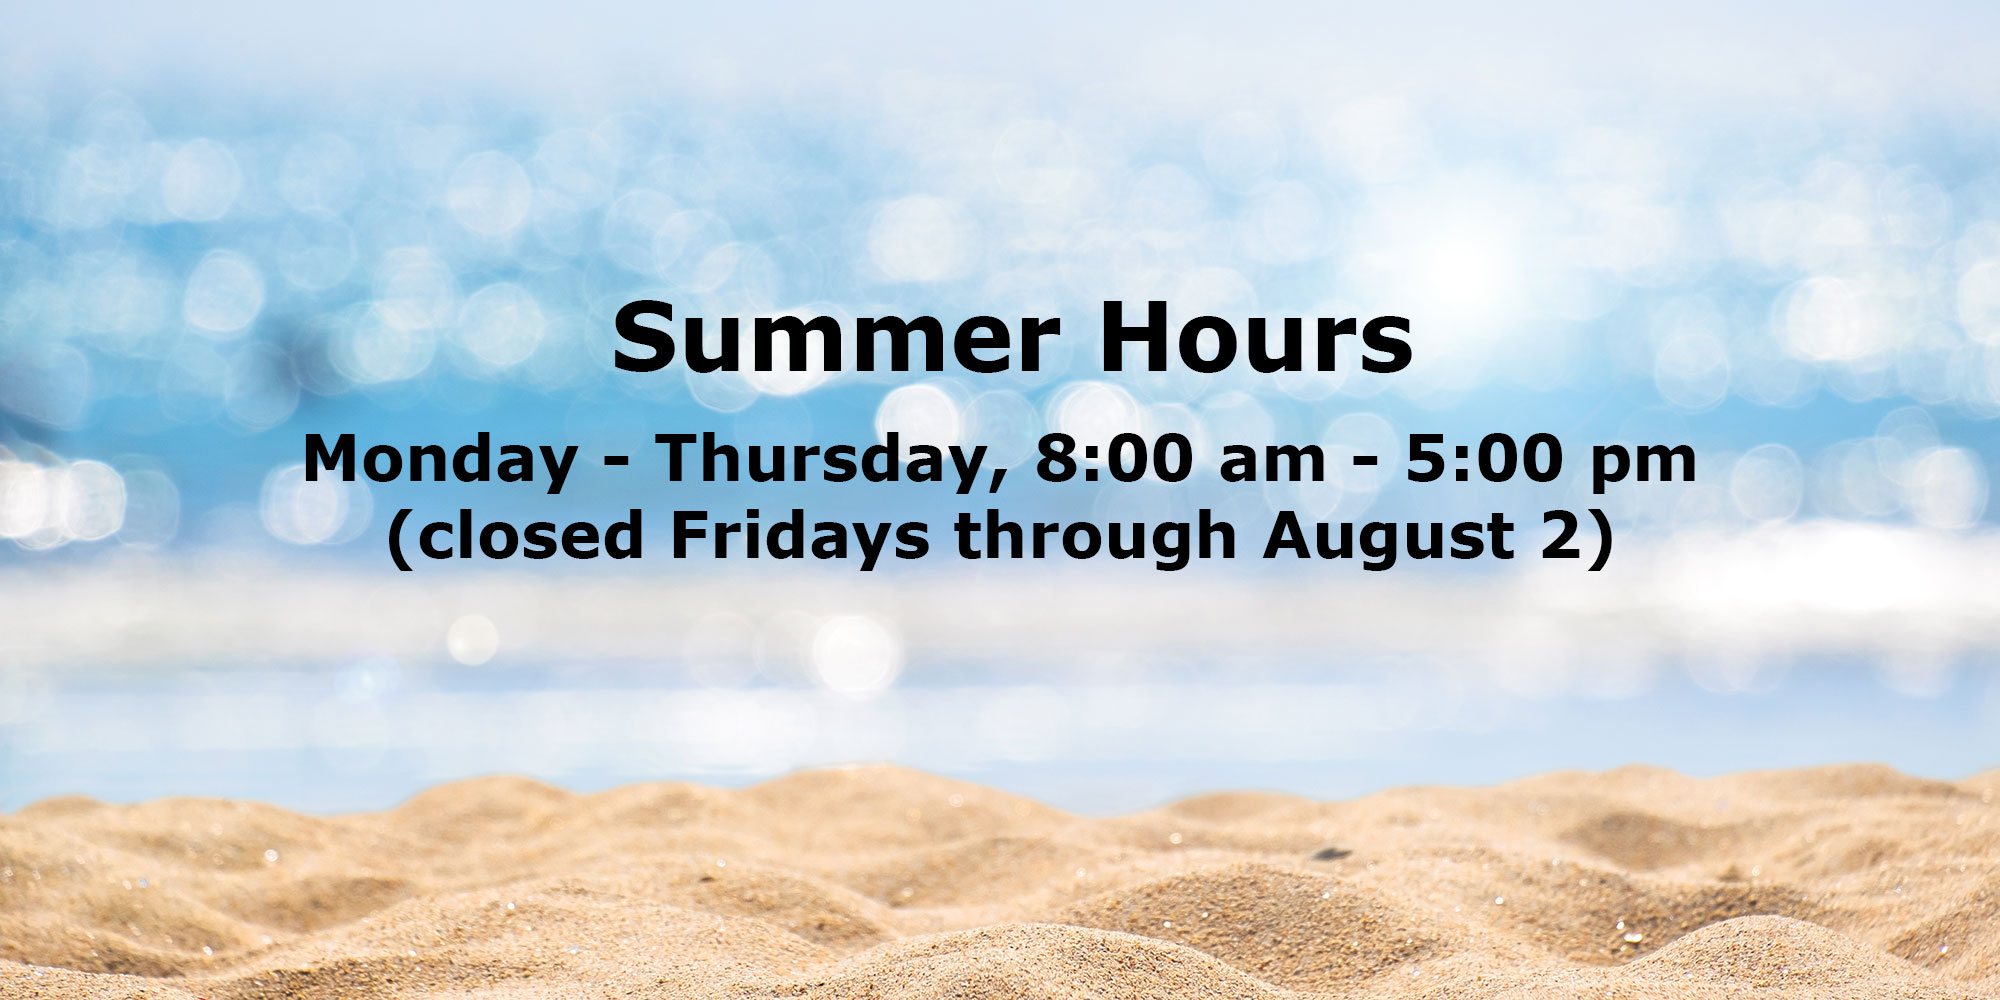 Summer Hours. Monday - Thursday, 8:00 am - 5:00 pm. Closed Fridays through August 2.